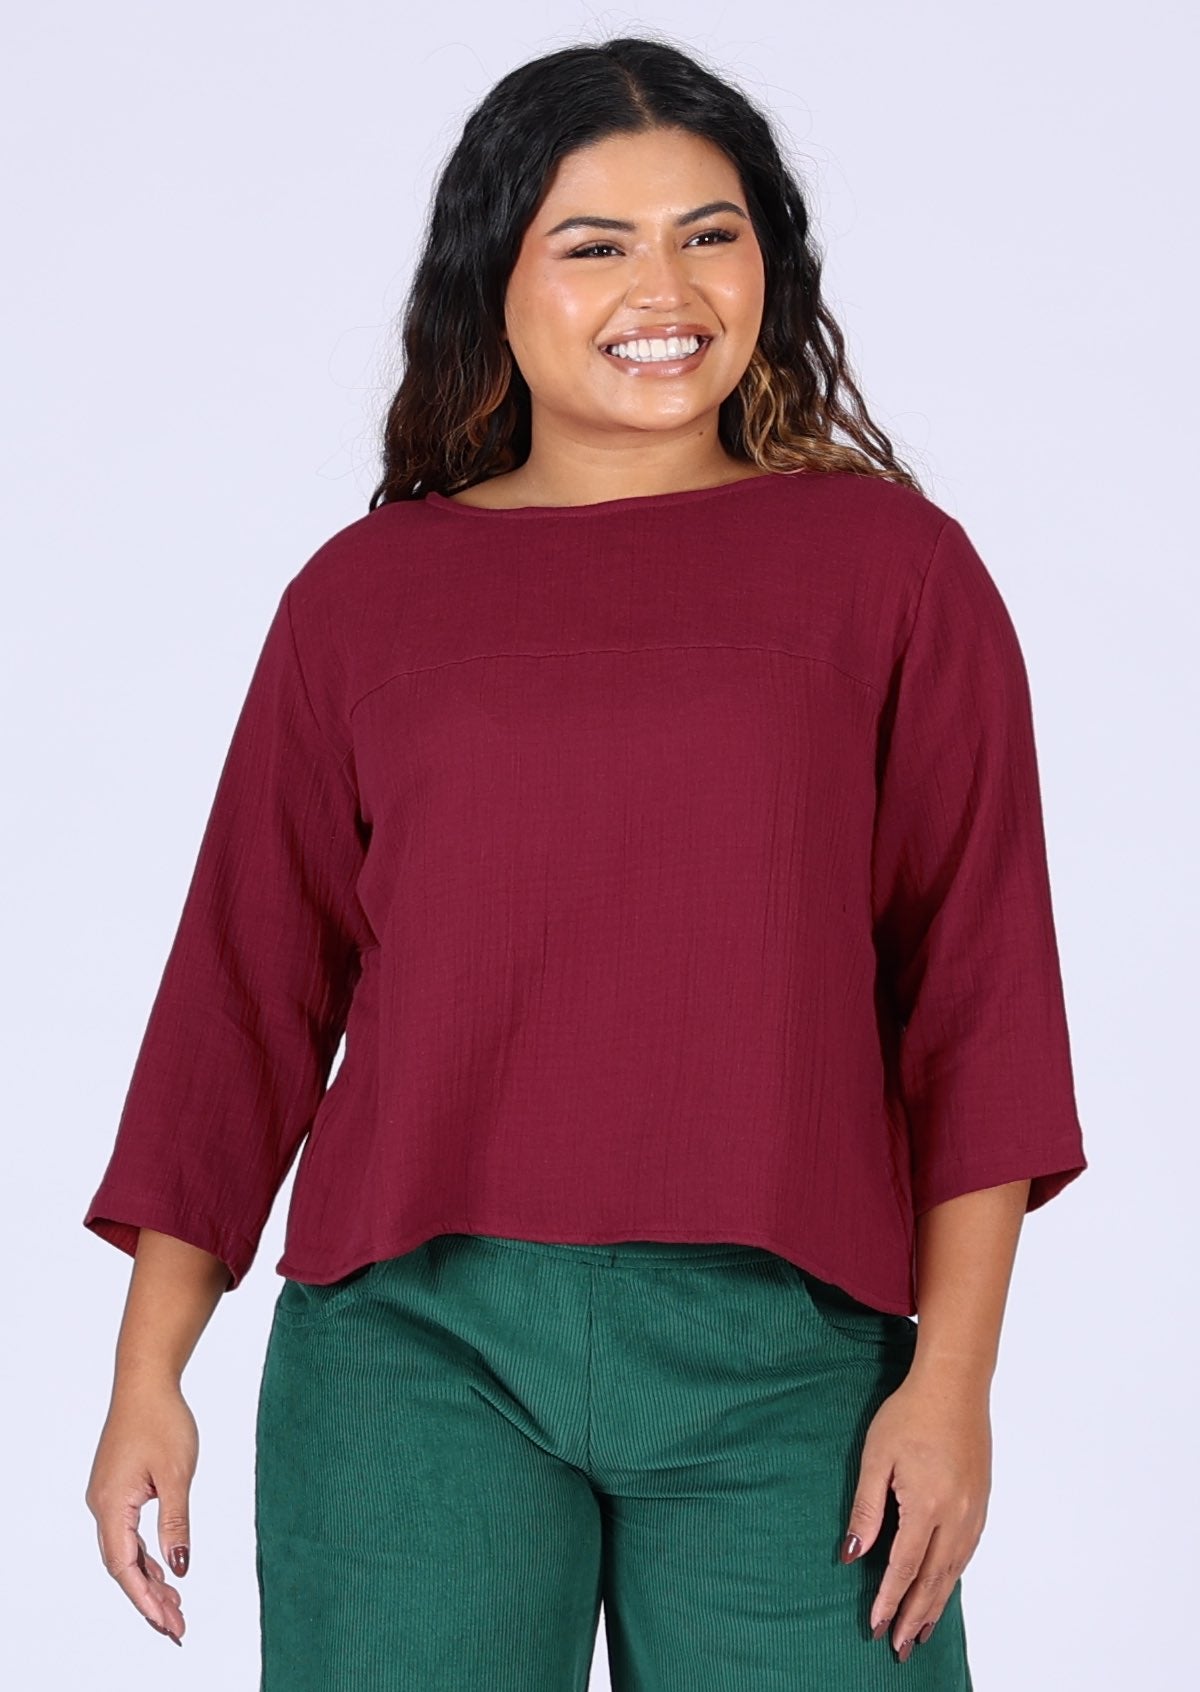 Lightweight cotton loose fit top perfect for day and night wear